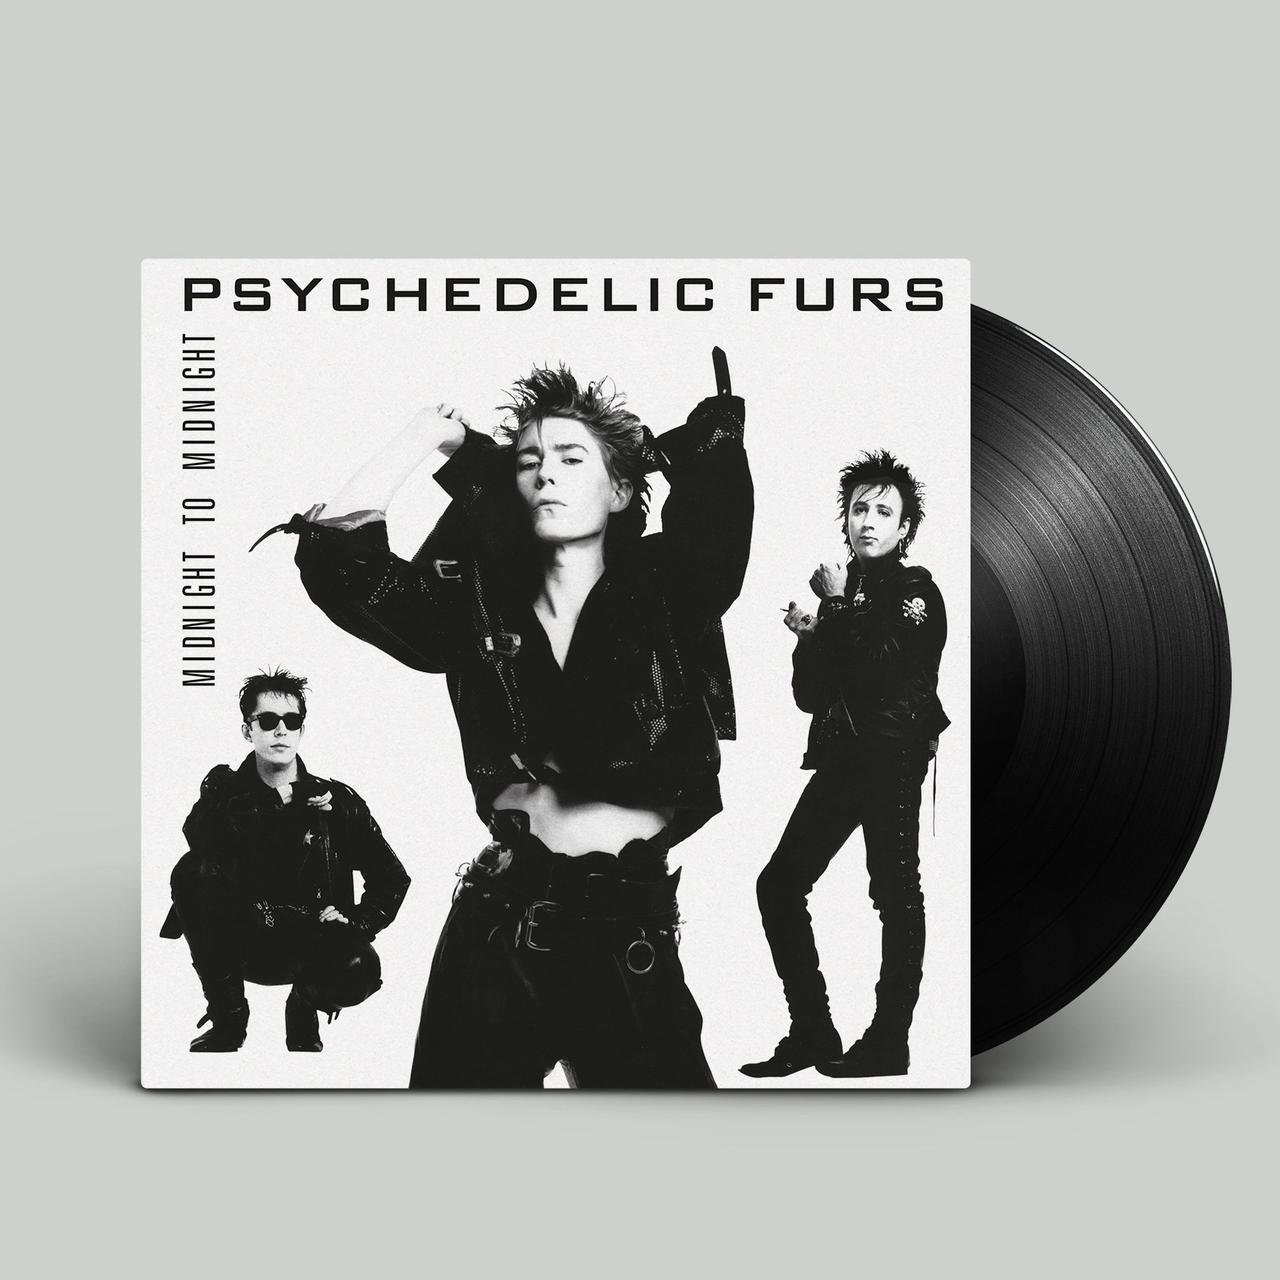 VINYL RELEASES: Psychedelic Furs, Limb & More!